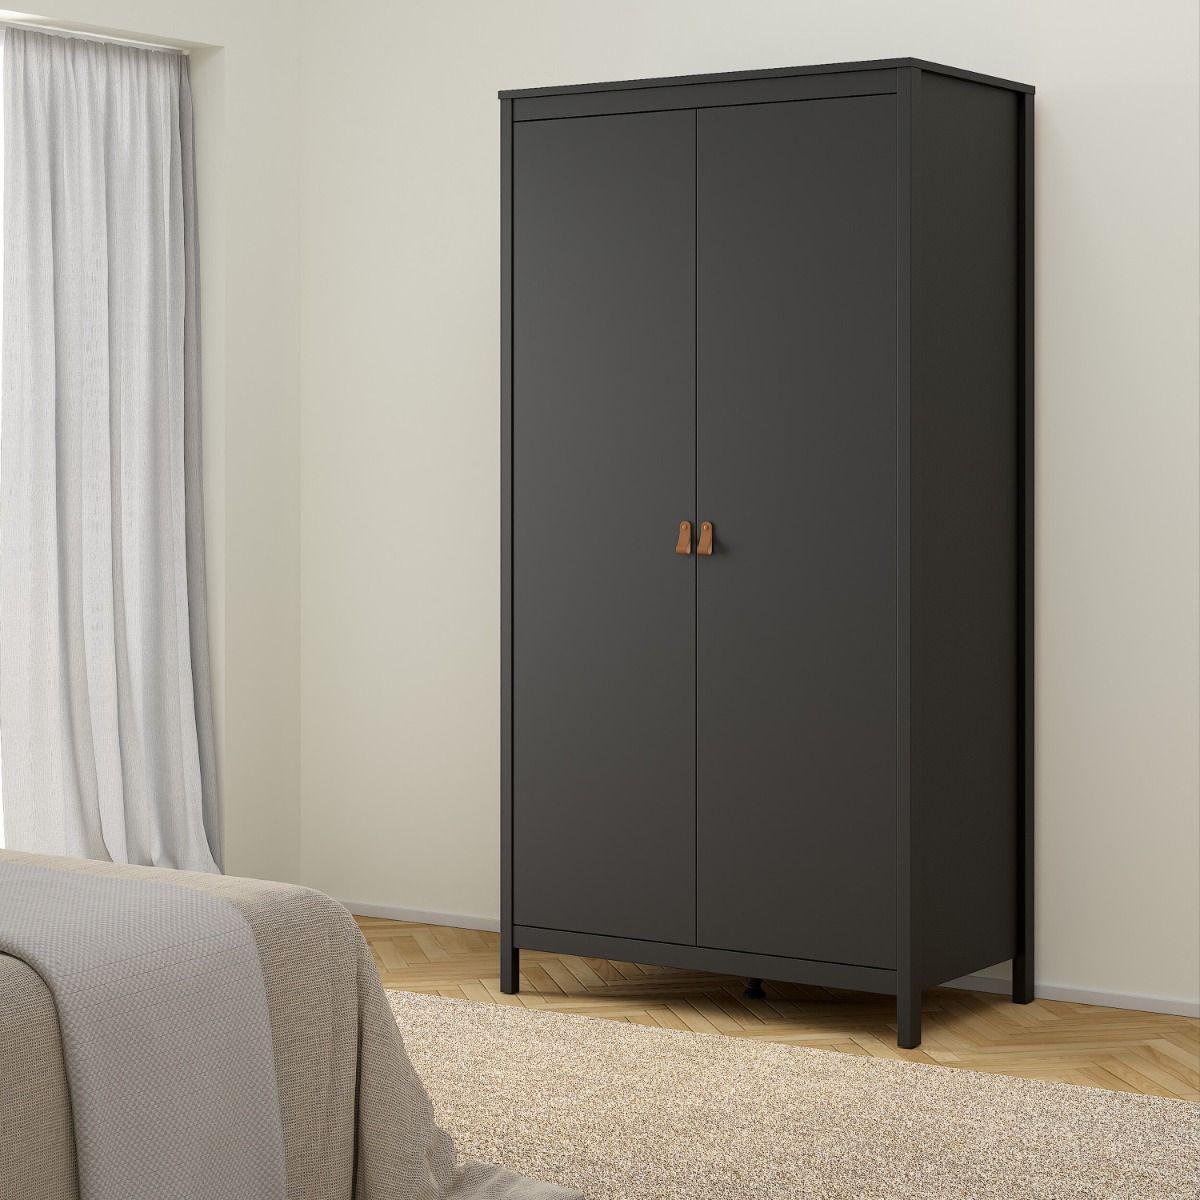 Furniture To Go Barcelona Wardrobe with 2 Doors Black-Better Bed Company